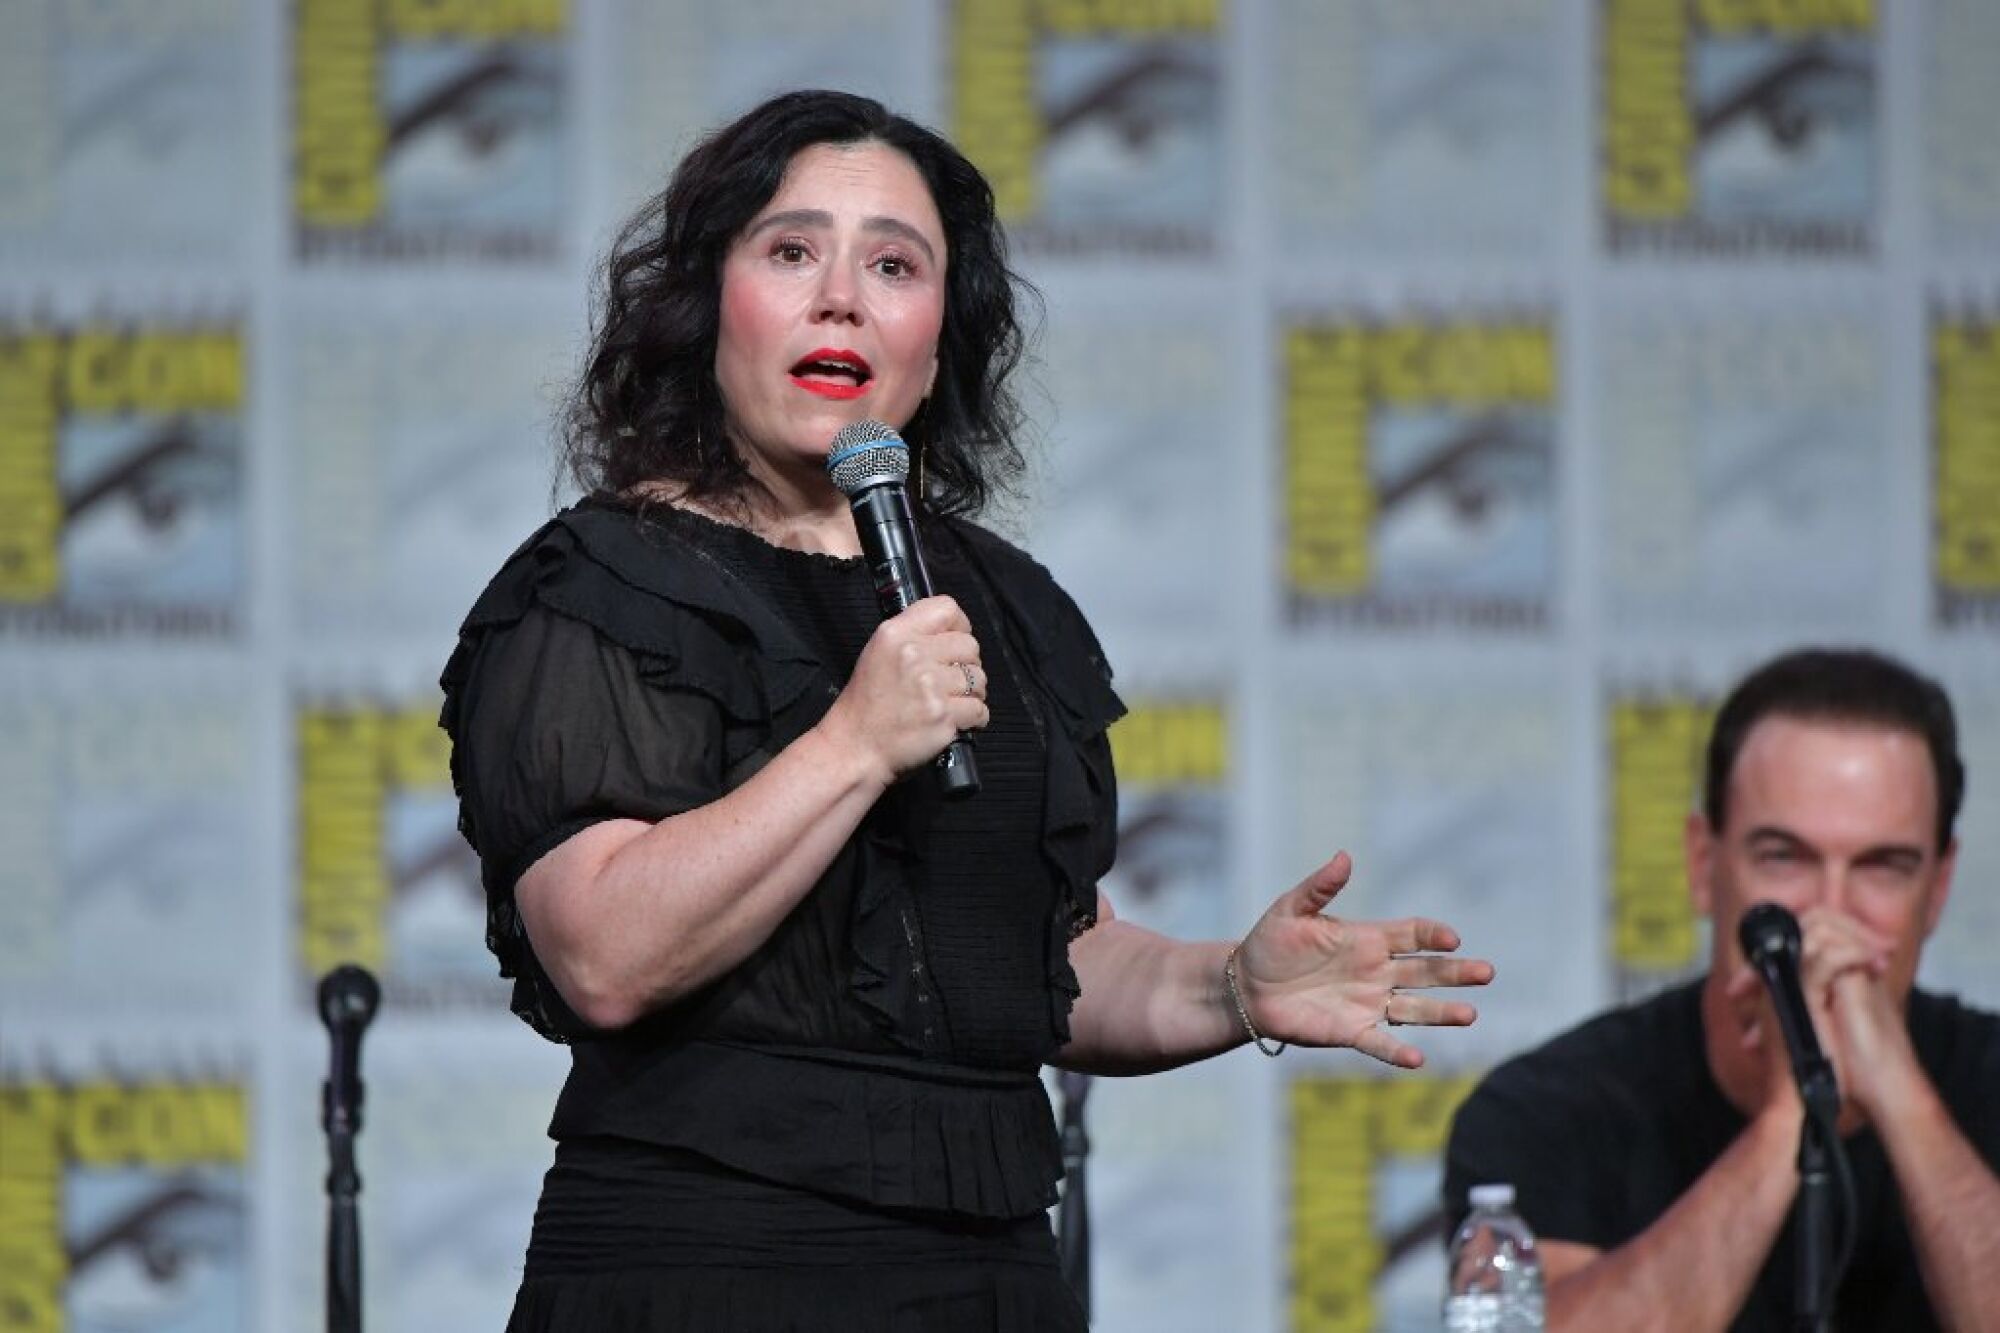 Alex Borstein speaks at the "Family Guy" Panel during 2019 Comic-Con International at San Diego Convention Center on July 20, 2019 in San Diego, California.